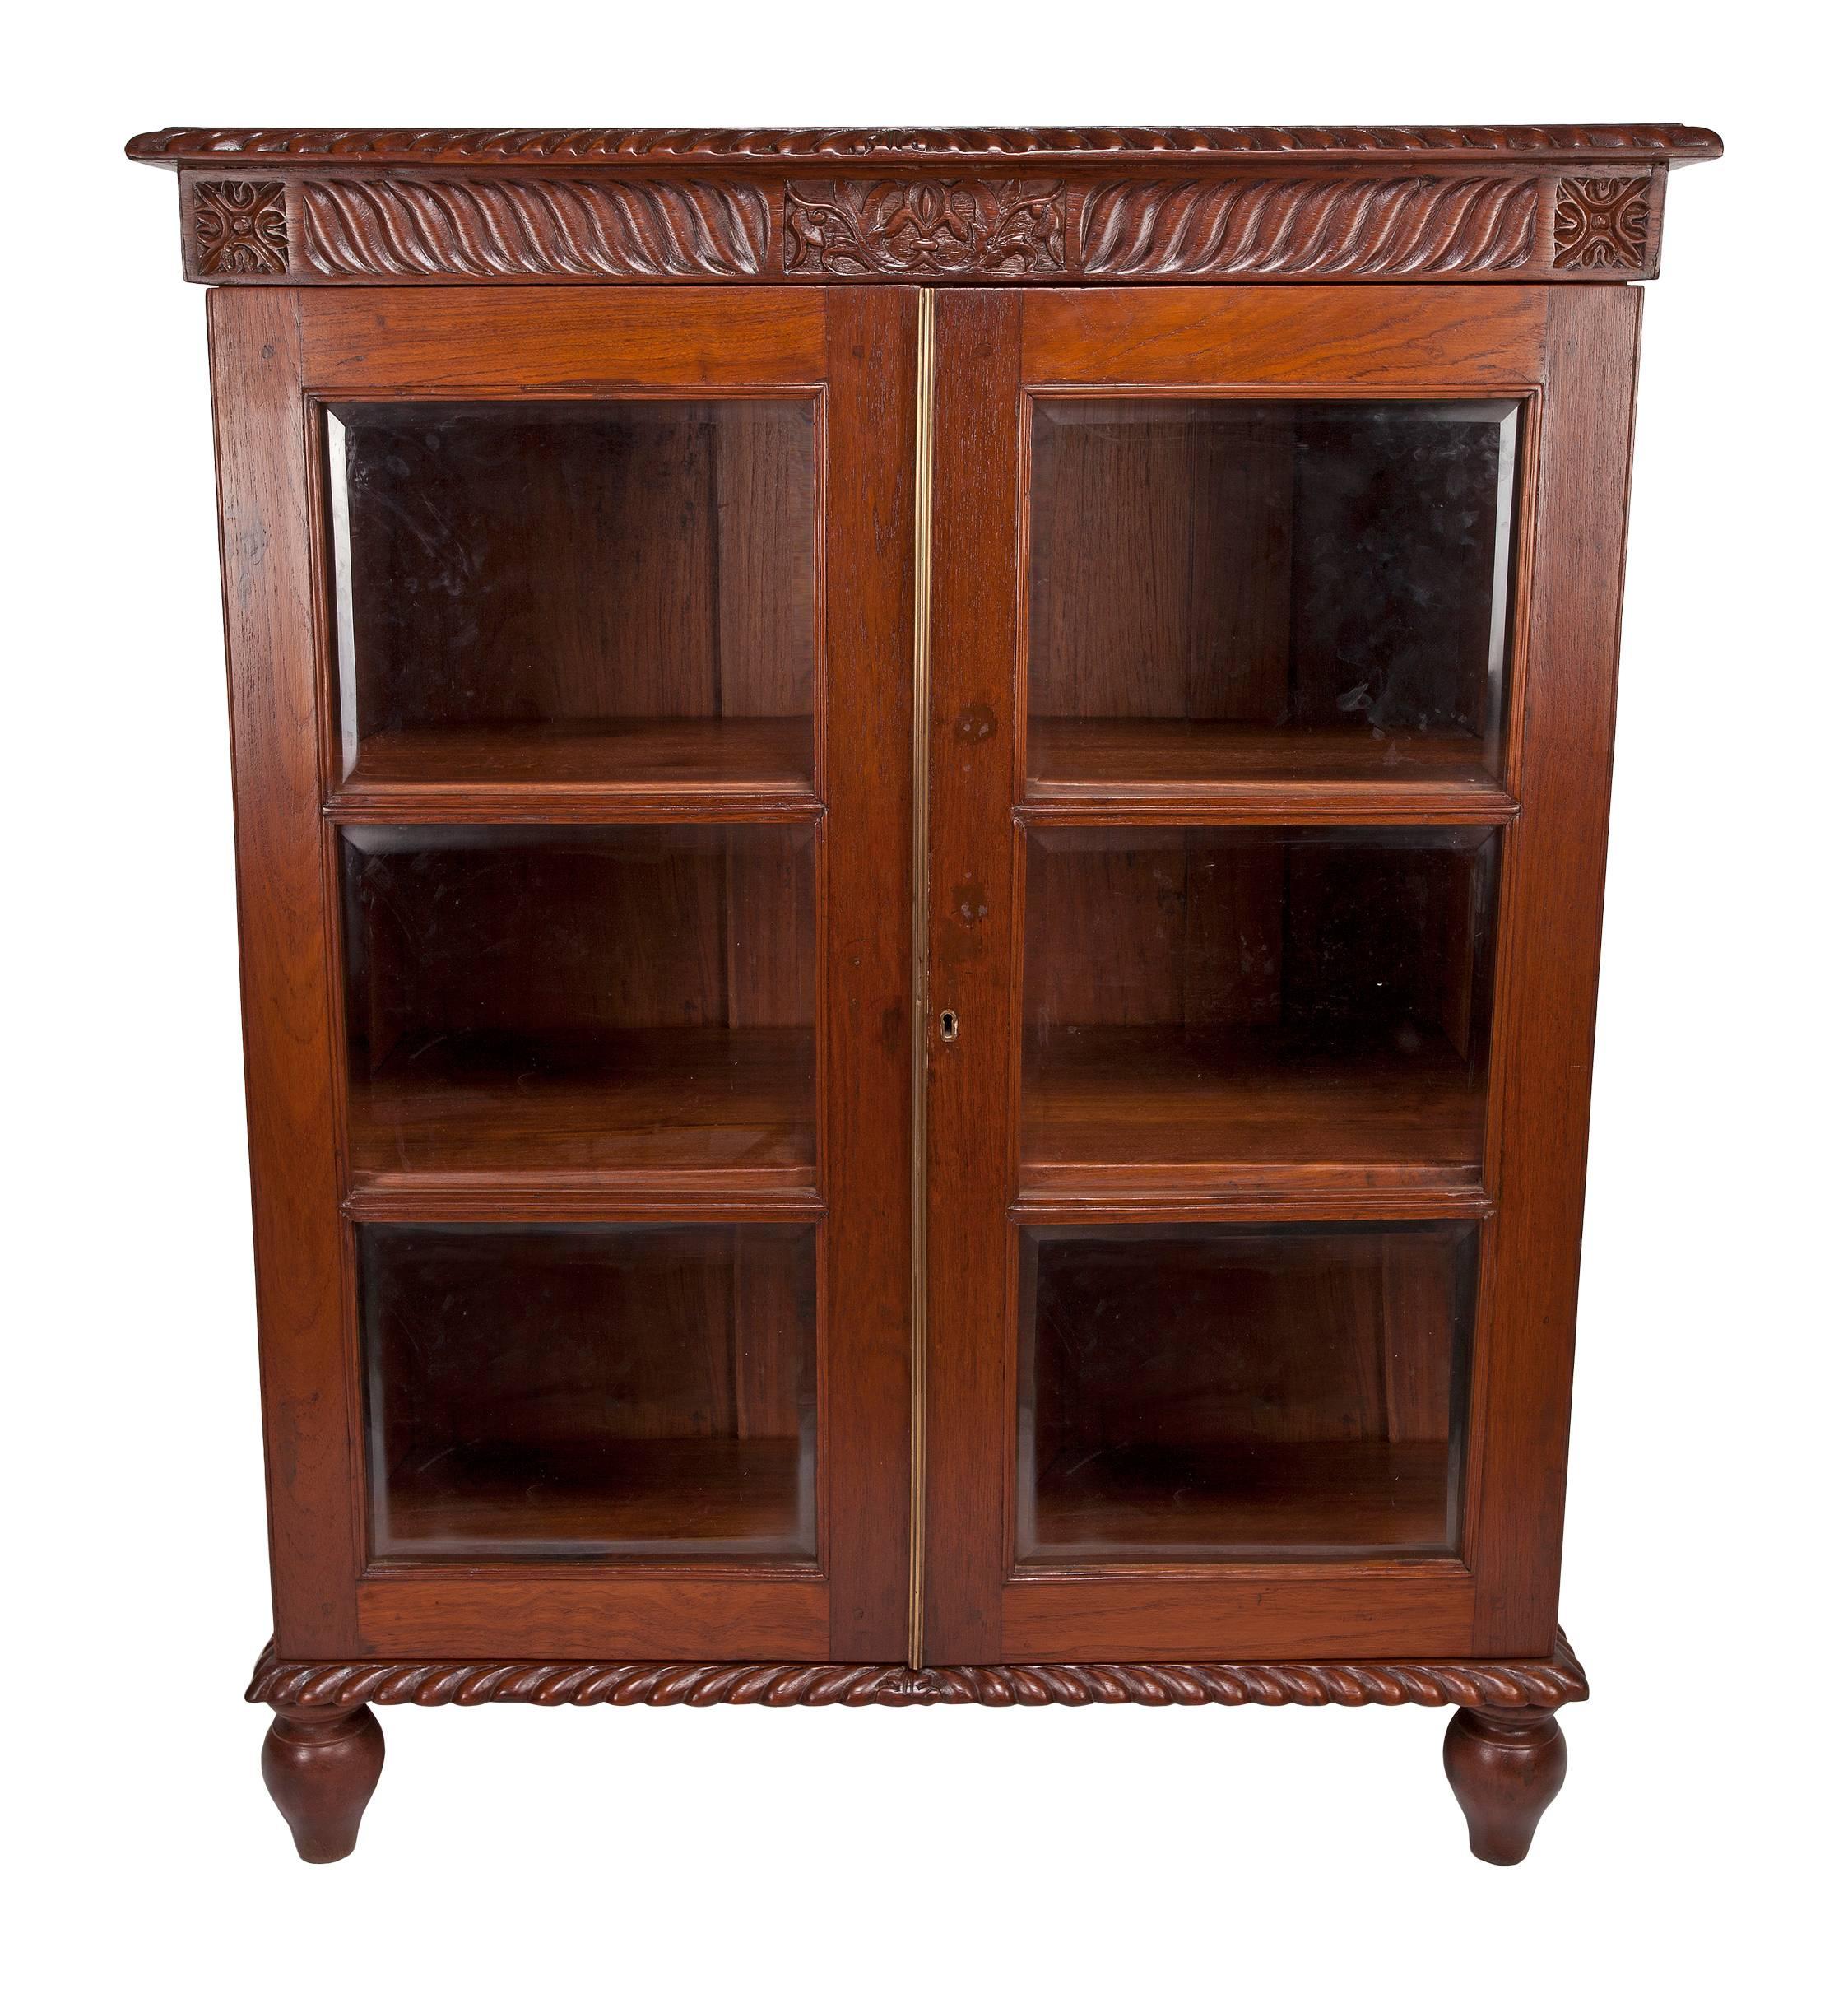 Lovely British Colonial mahogany petite size bookcase with glass door panels and interior shelving. Lovely gadrooned-carved edging along the cornice and the apron. Working lock and key. Great size and elegance for easy placement in a room. The width